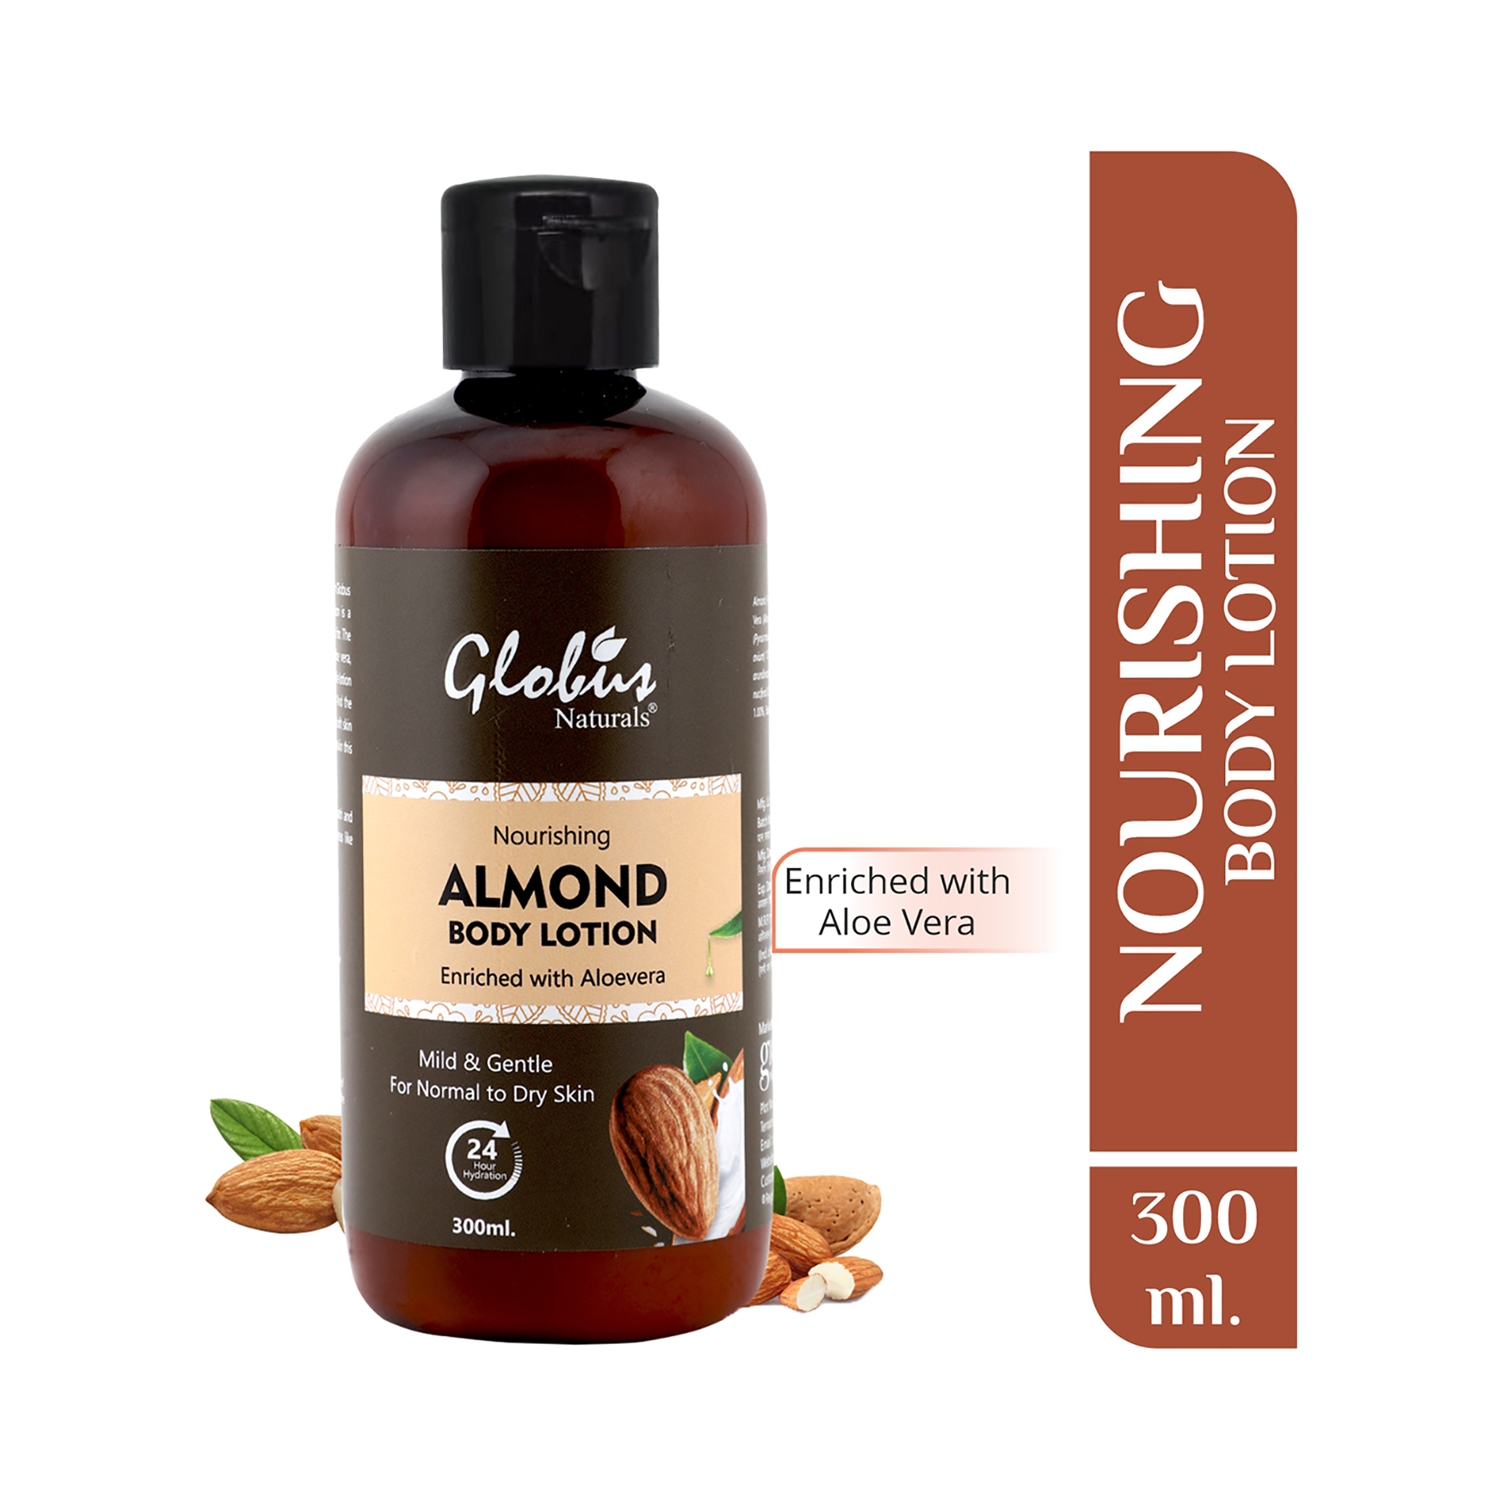 Globus Naturals | Globus Naturals Nourishing Almond Body Lotion Enriched With Aloe Vera, Coconut, Kokum Butter (300ml)